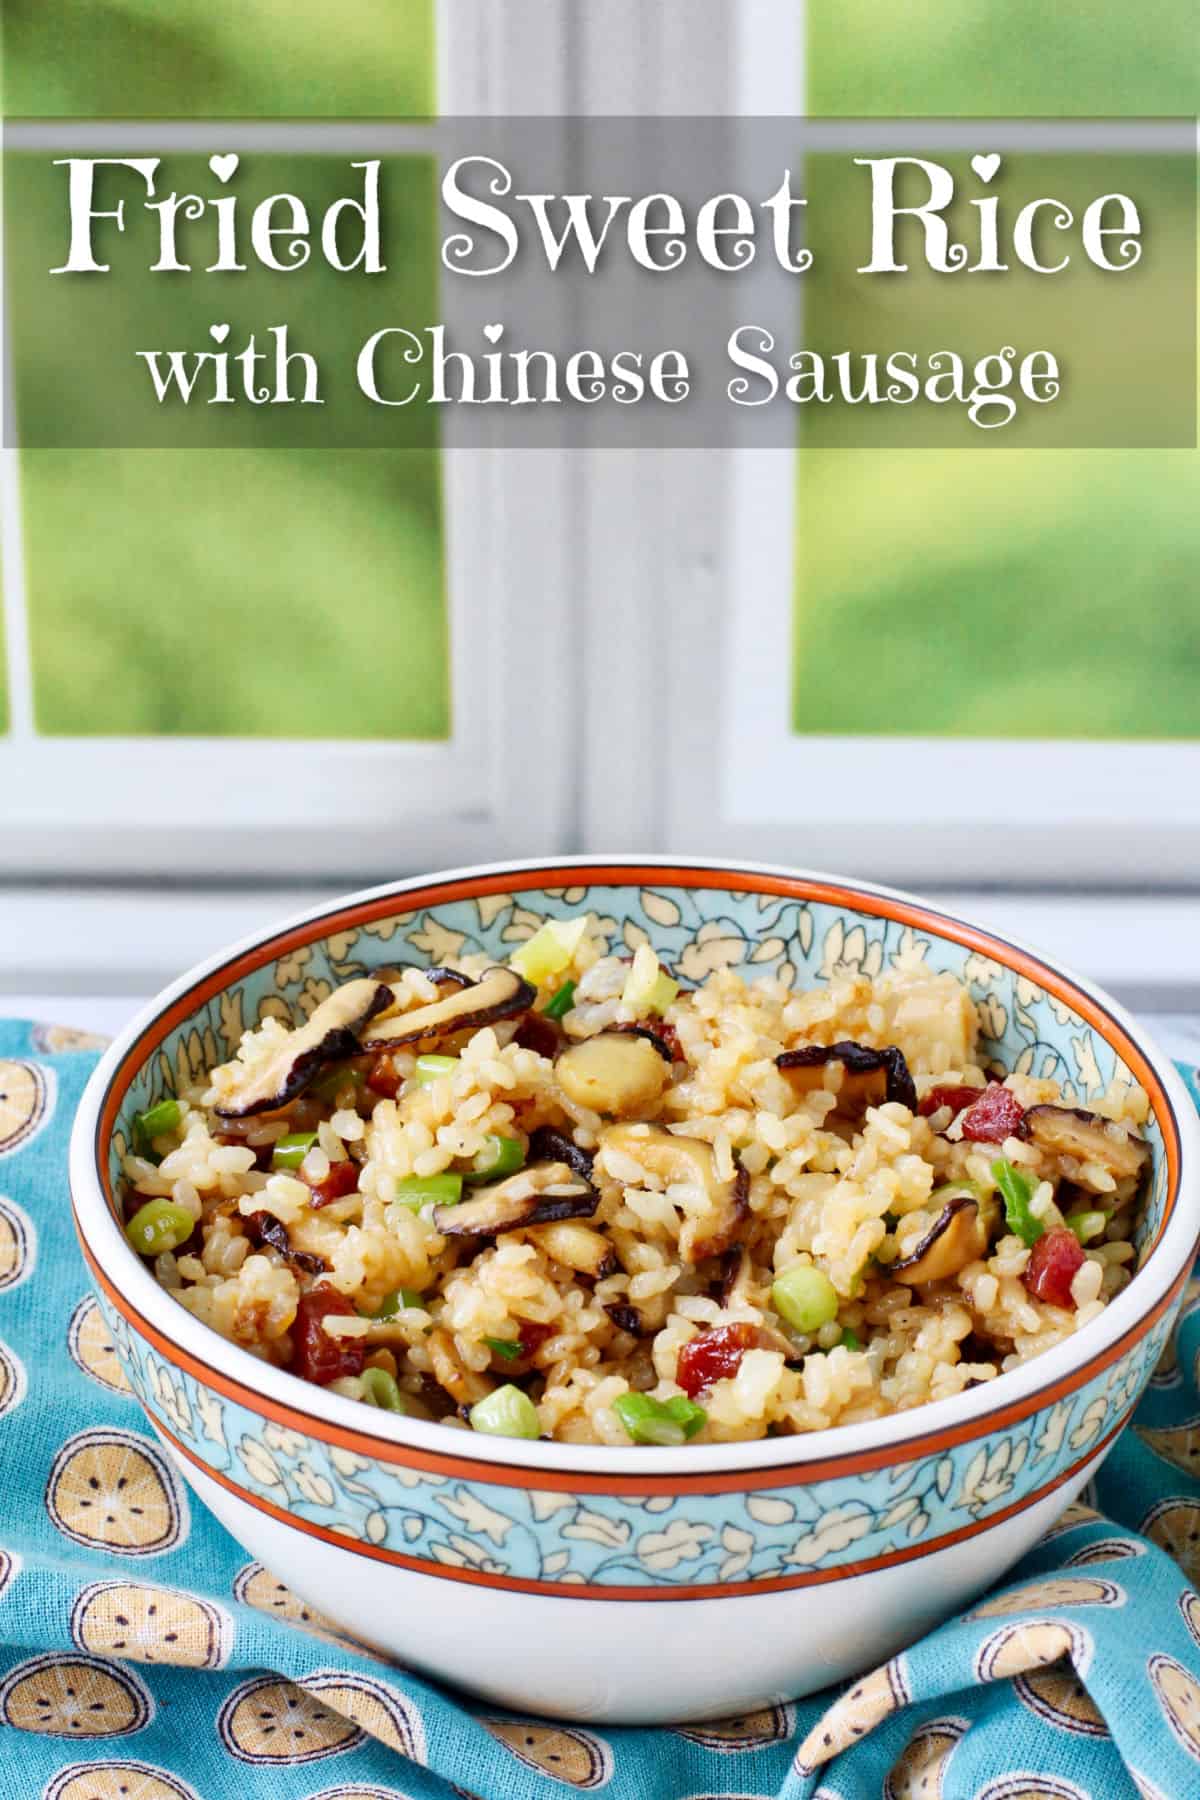 Fried Sweet Rice with Chinese Sausage